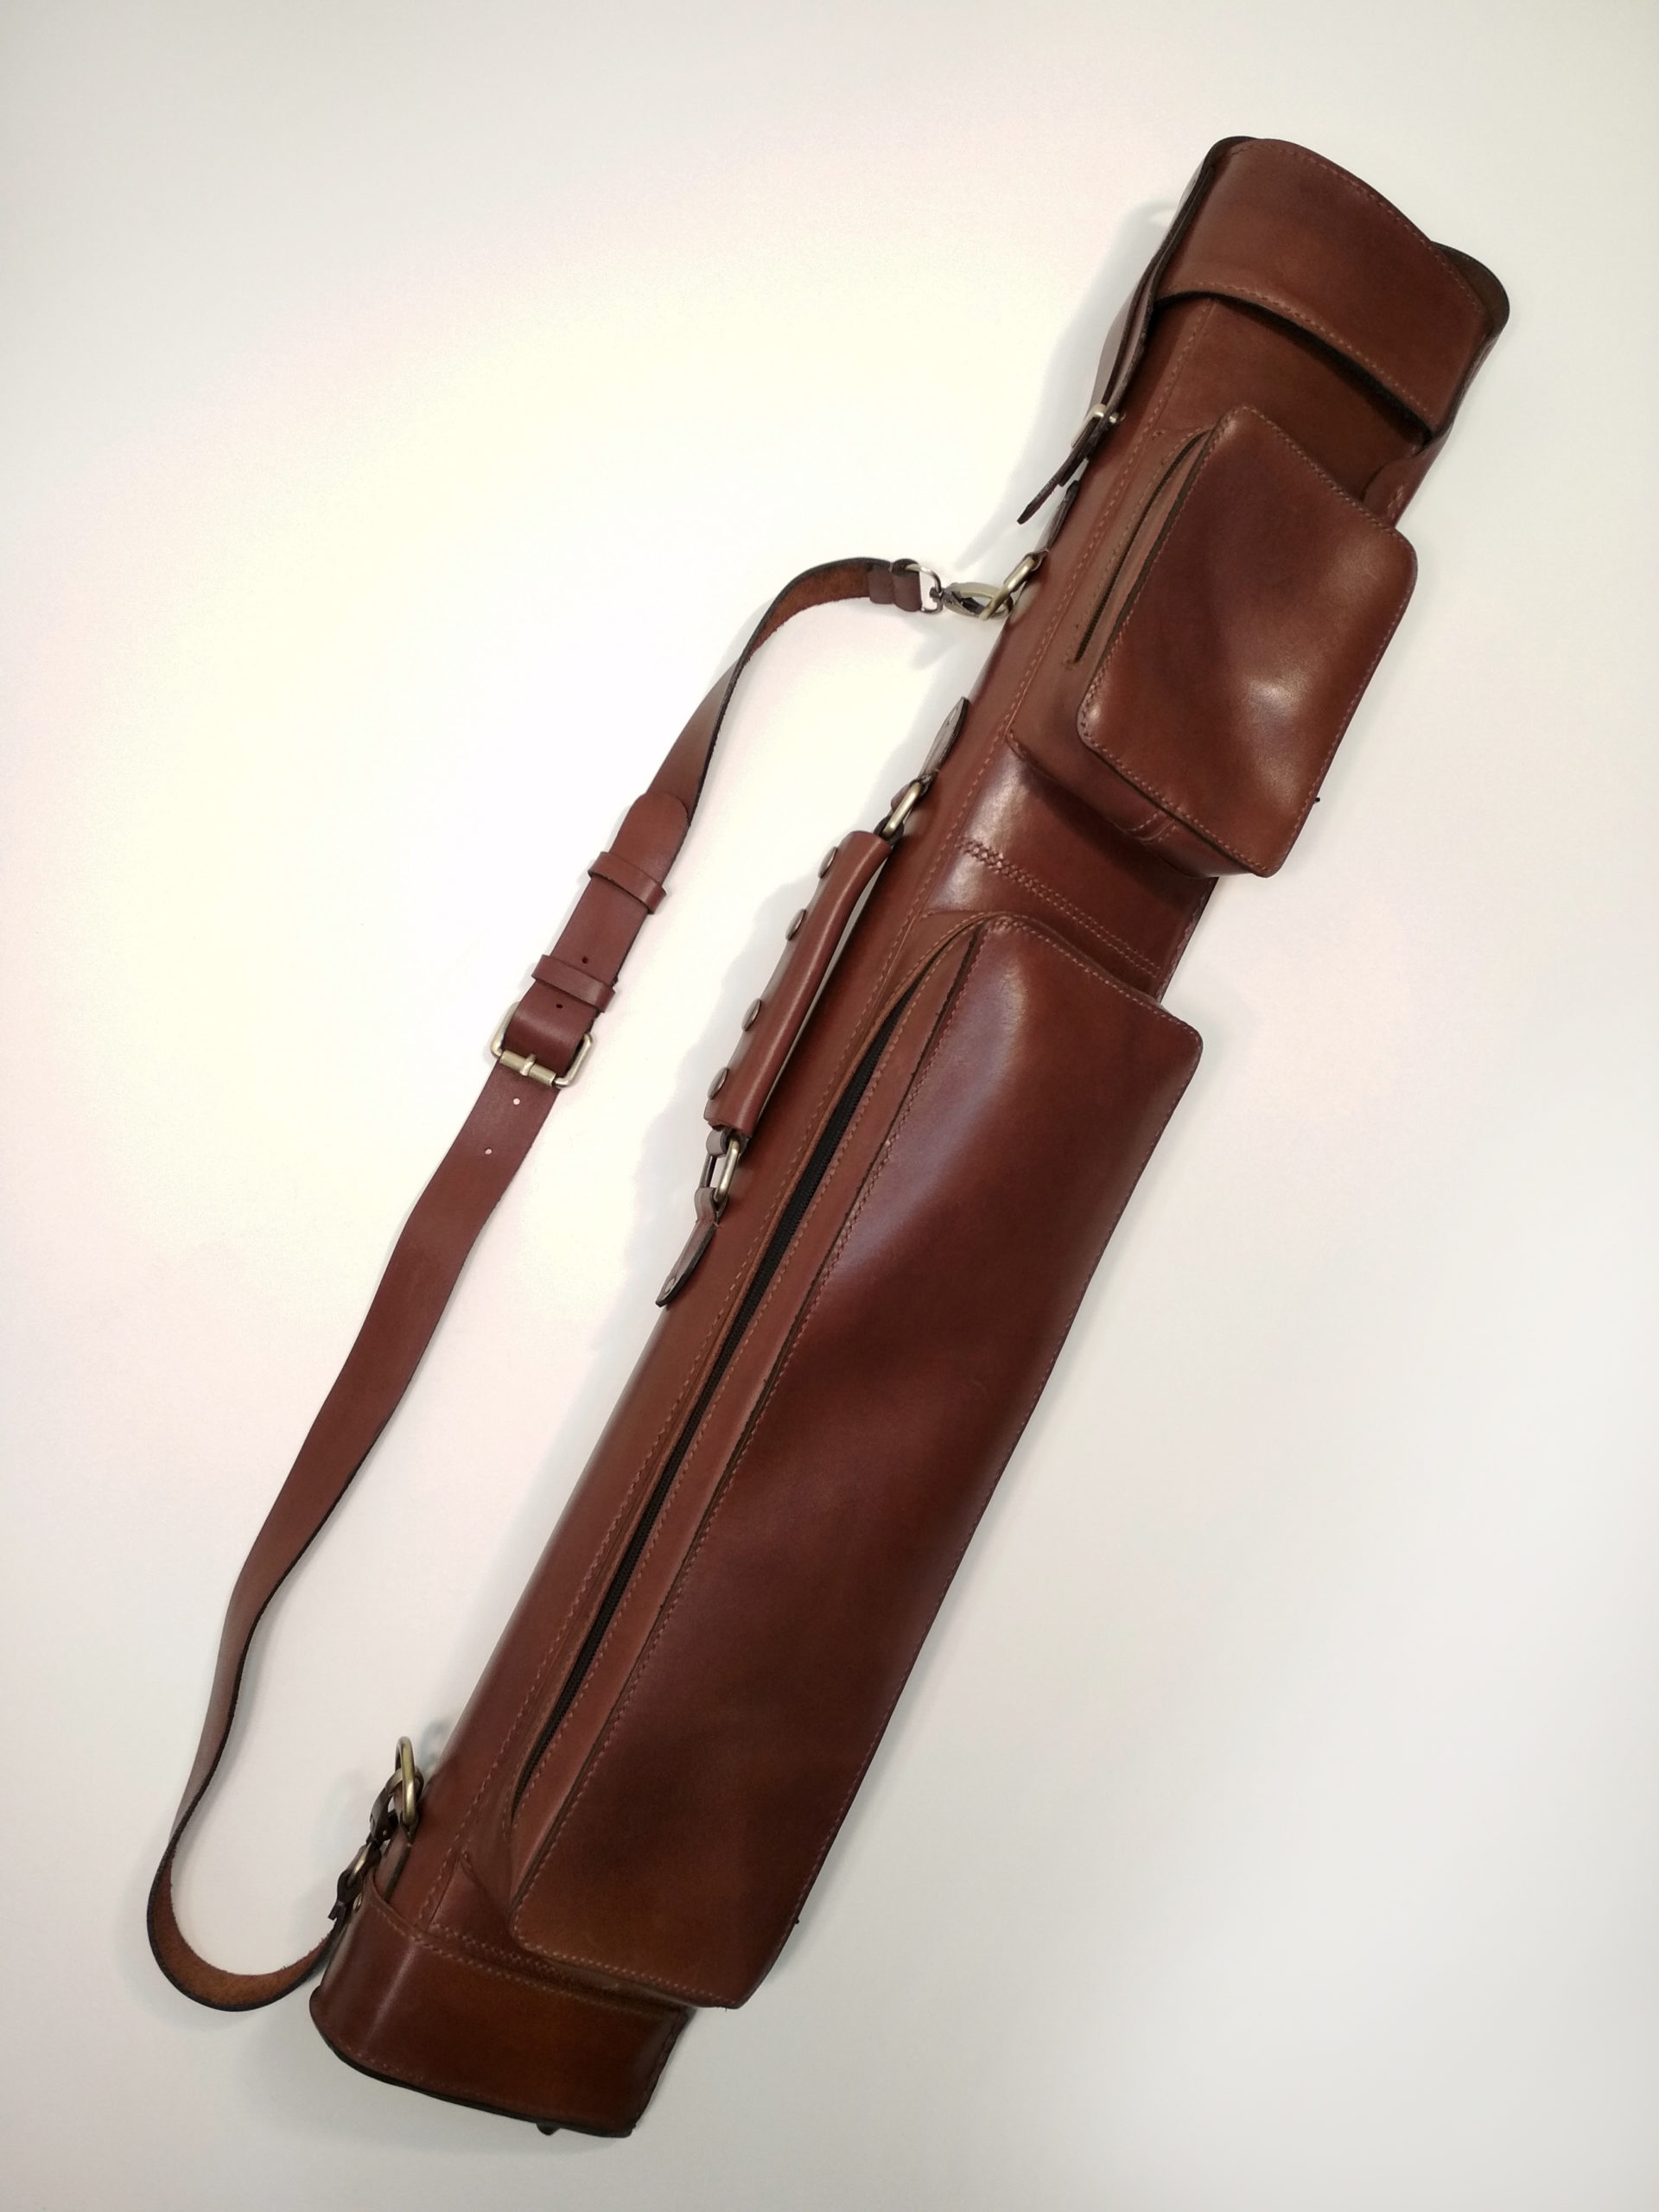 Leather Case for 2 Cues